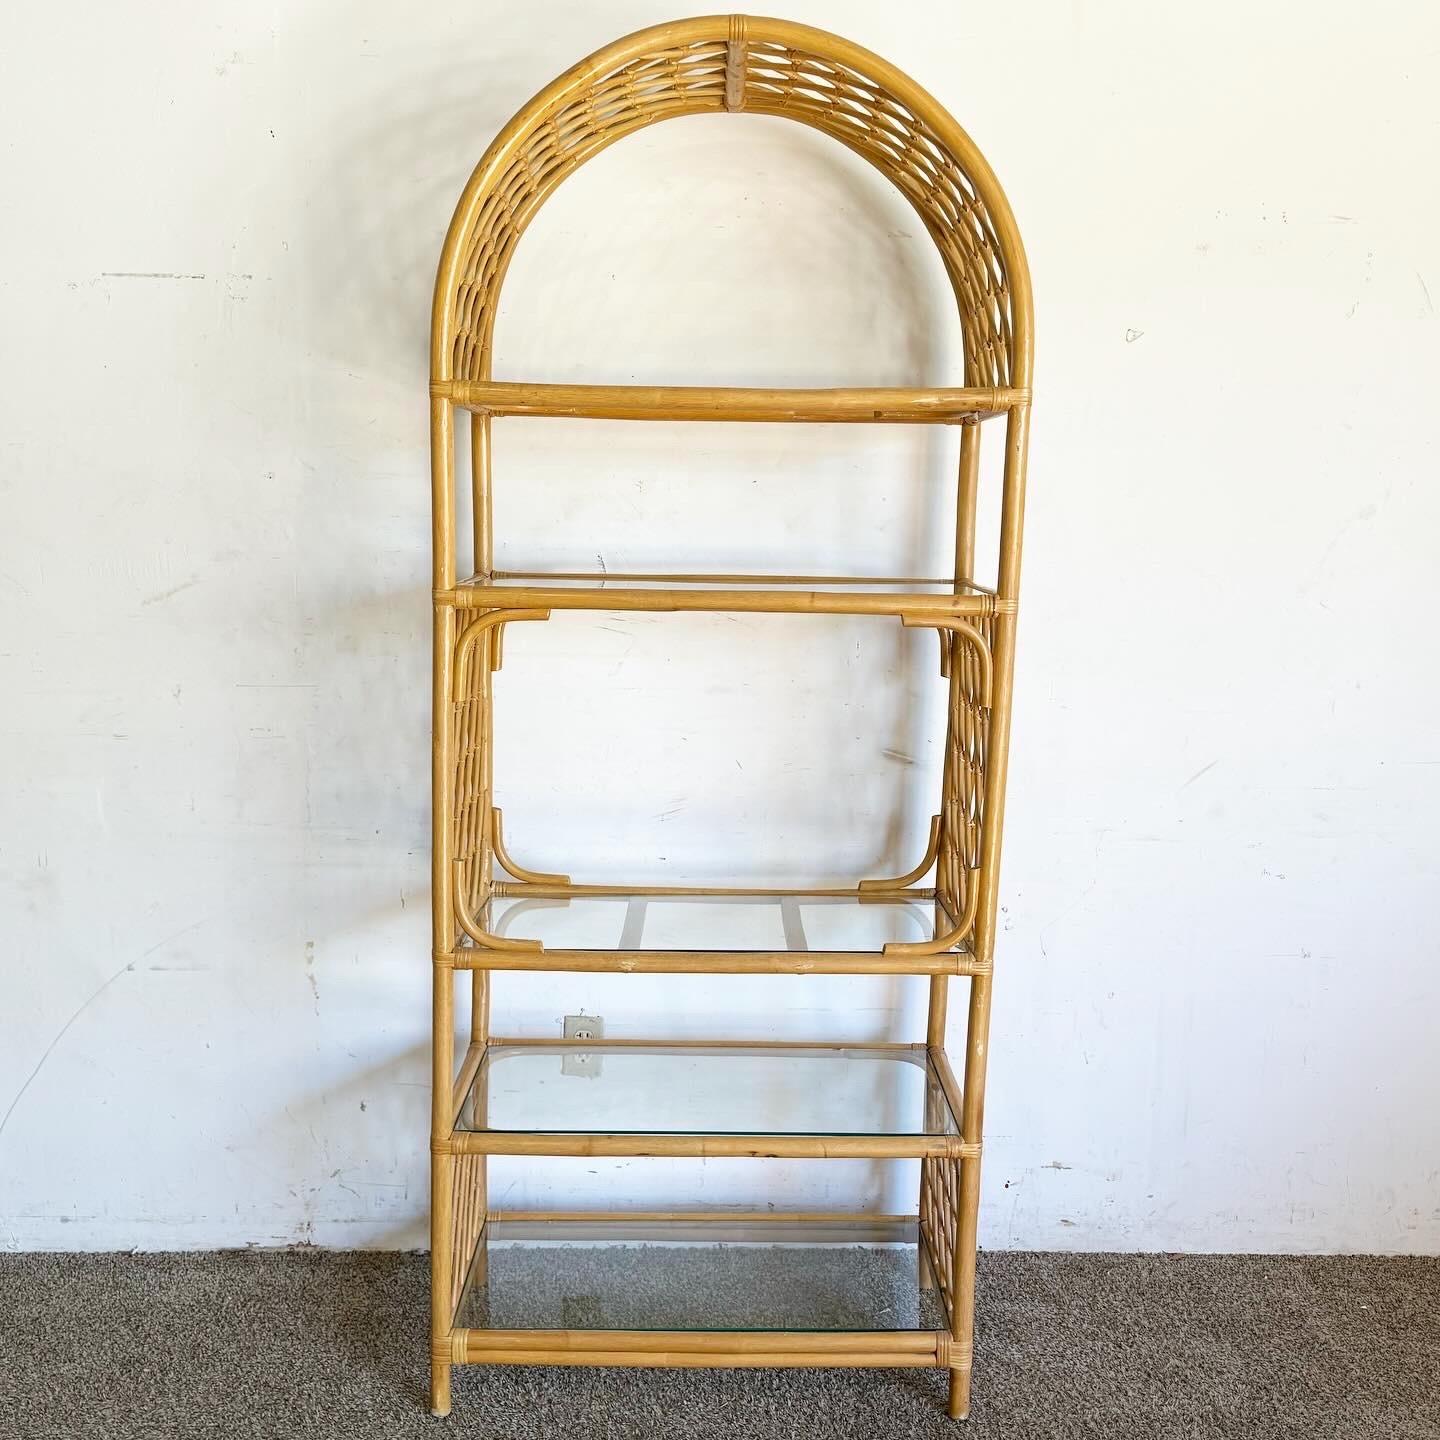 Boho Chic Arched Bamboo Rattan Etagere - 5 Shelves In Good Condition For Sale In Delray Beach, FL